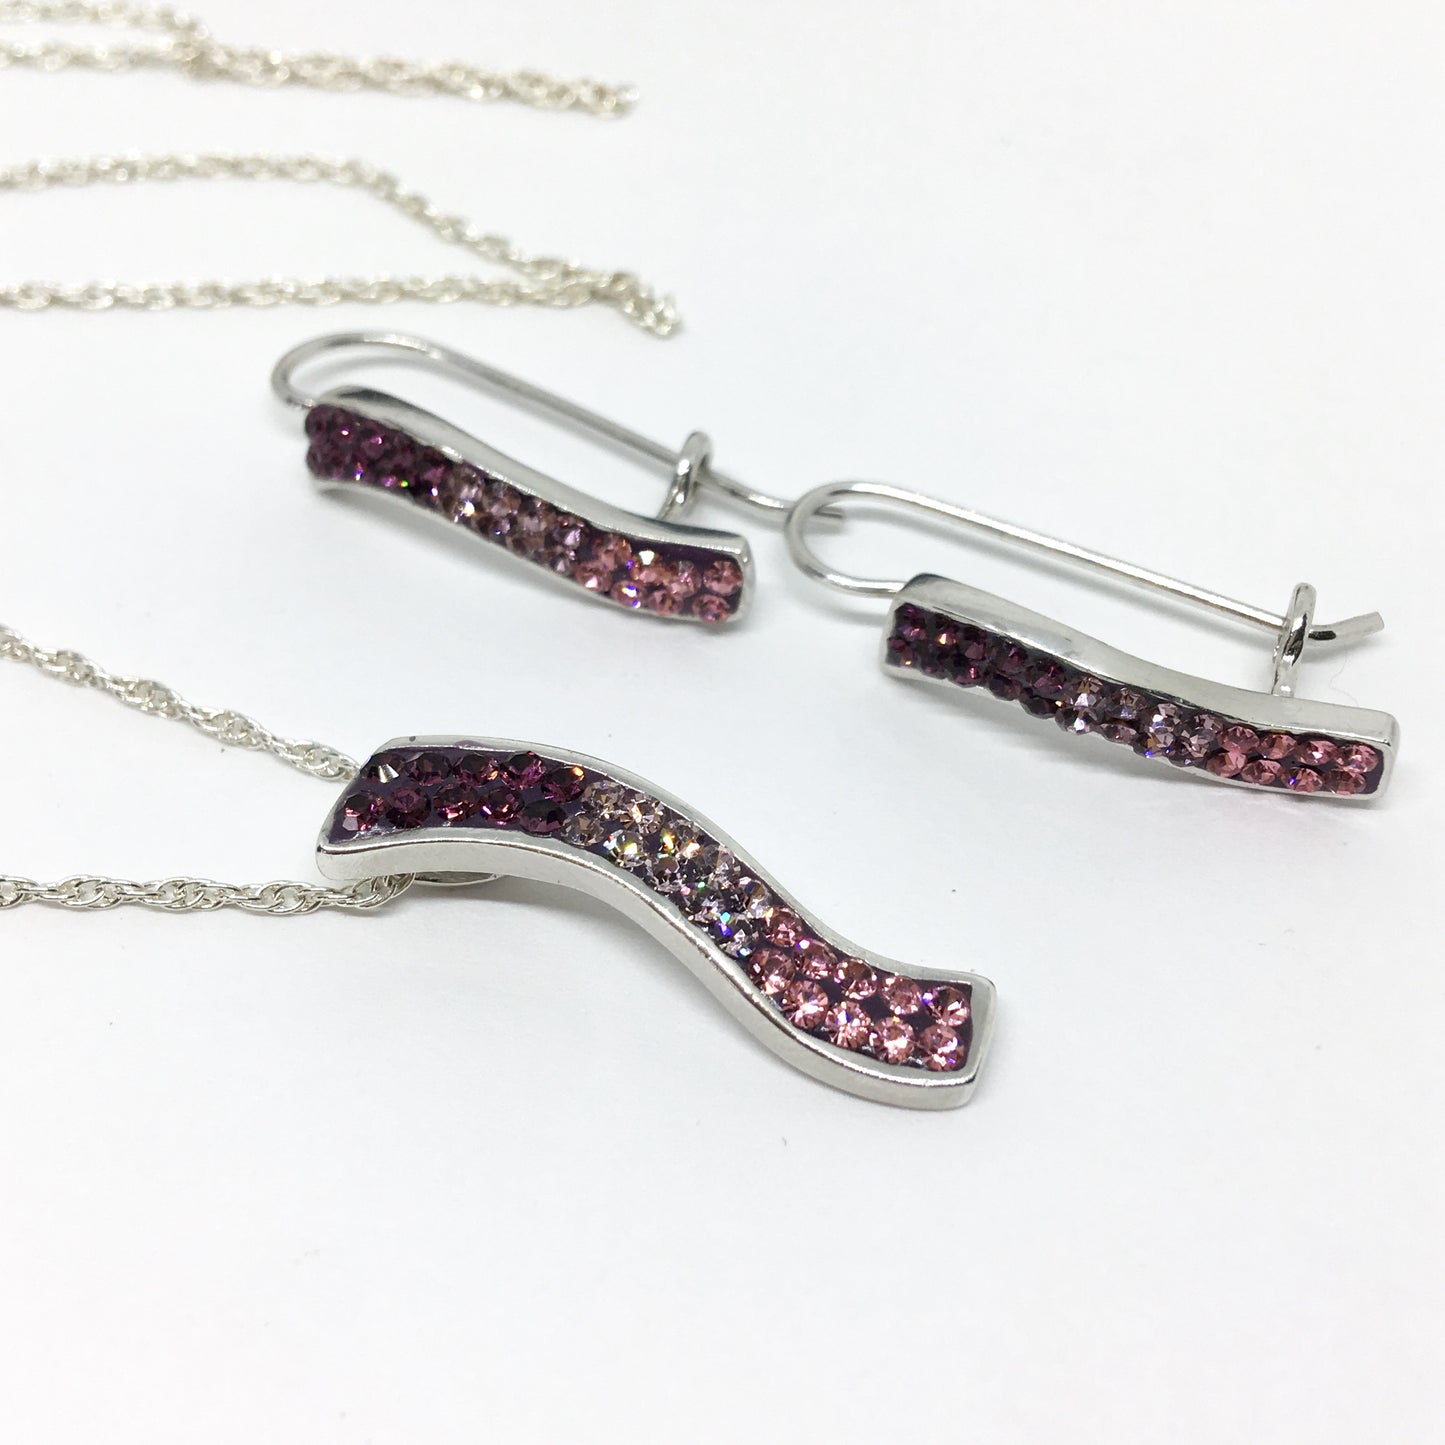 Jewelry - 24 in Sterling Silver Sparkly Purple Ombre Crystal Wavy Design Necklace Pendant & Earrings set